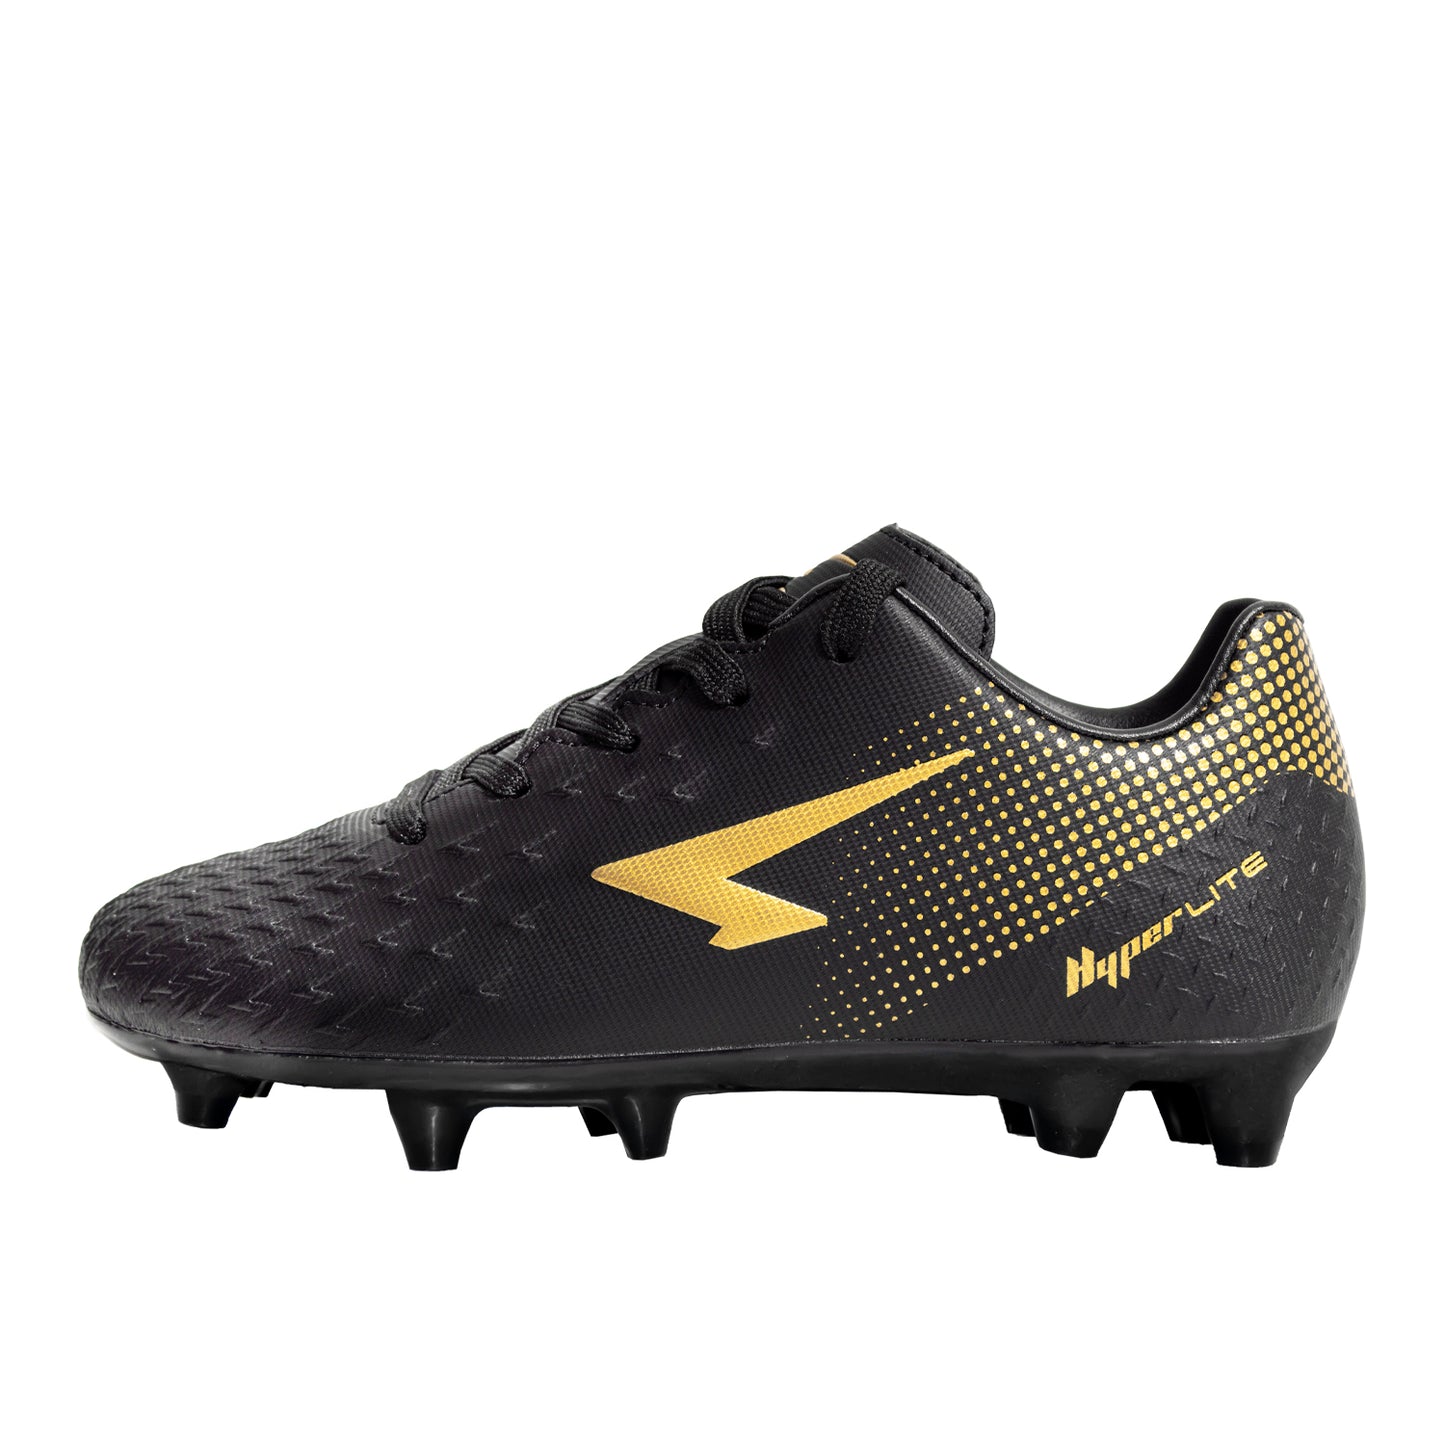 Pace Senior Football Boots - Black/Gold